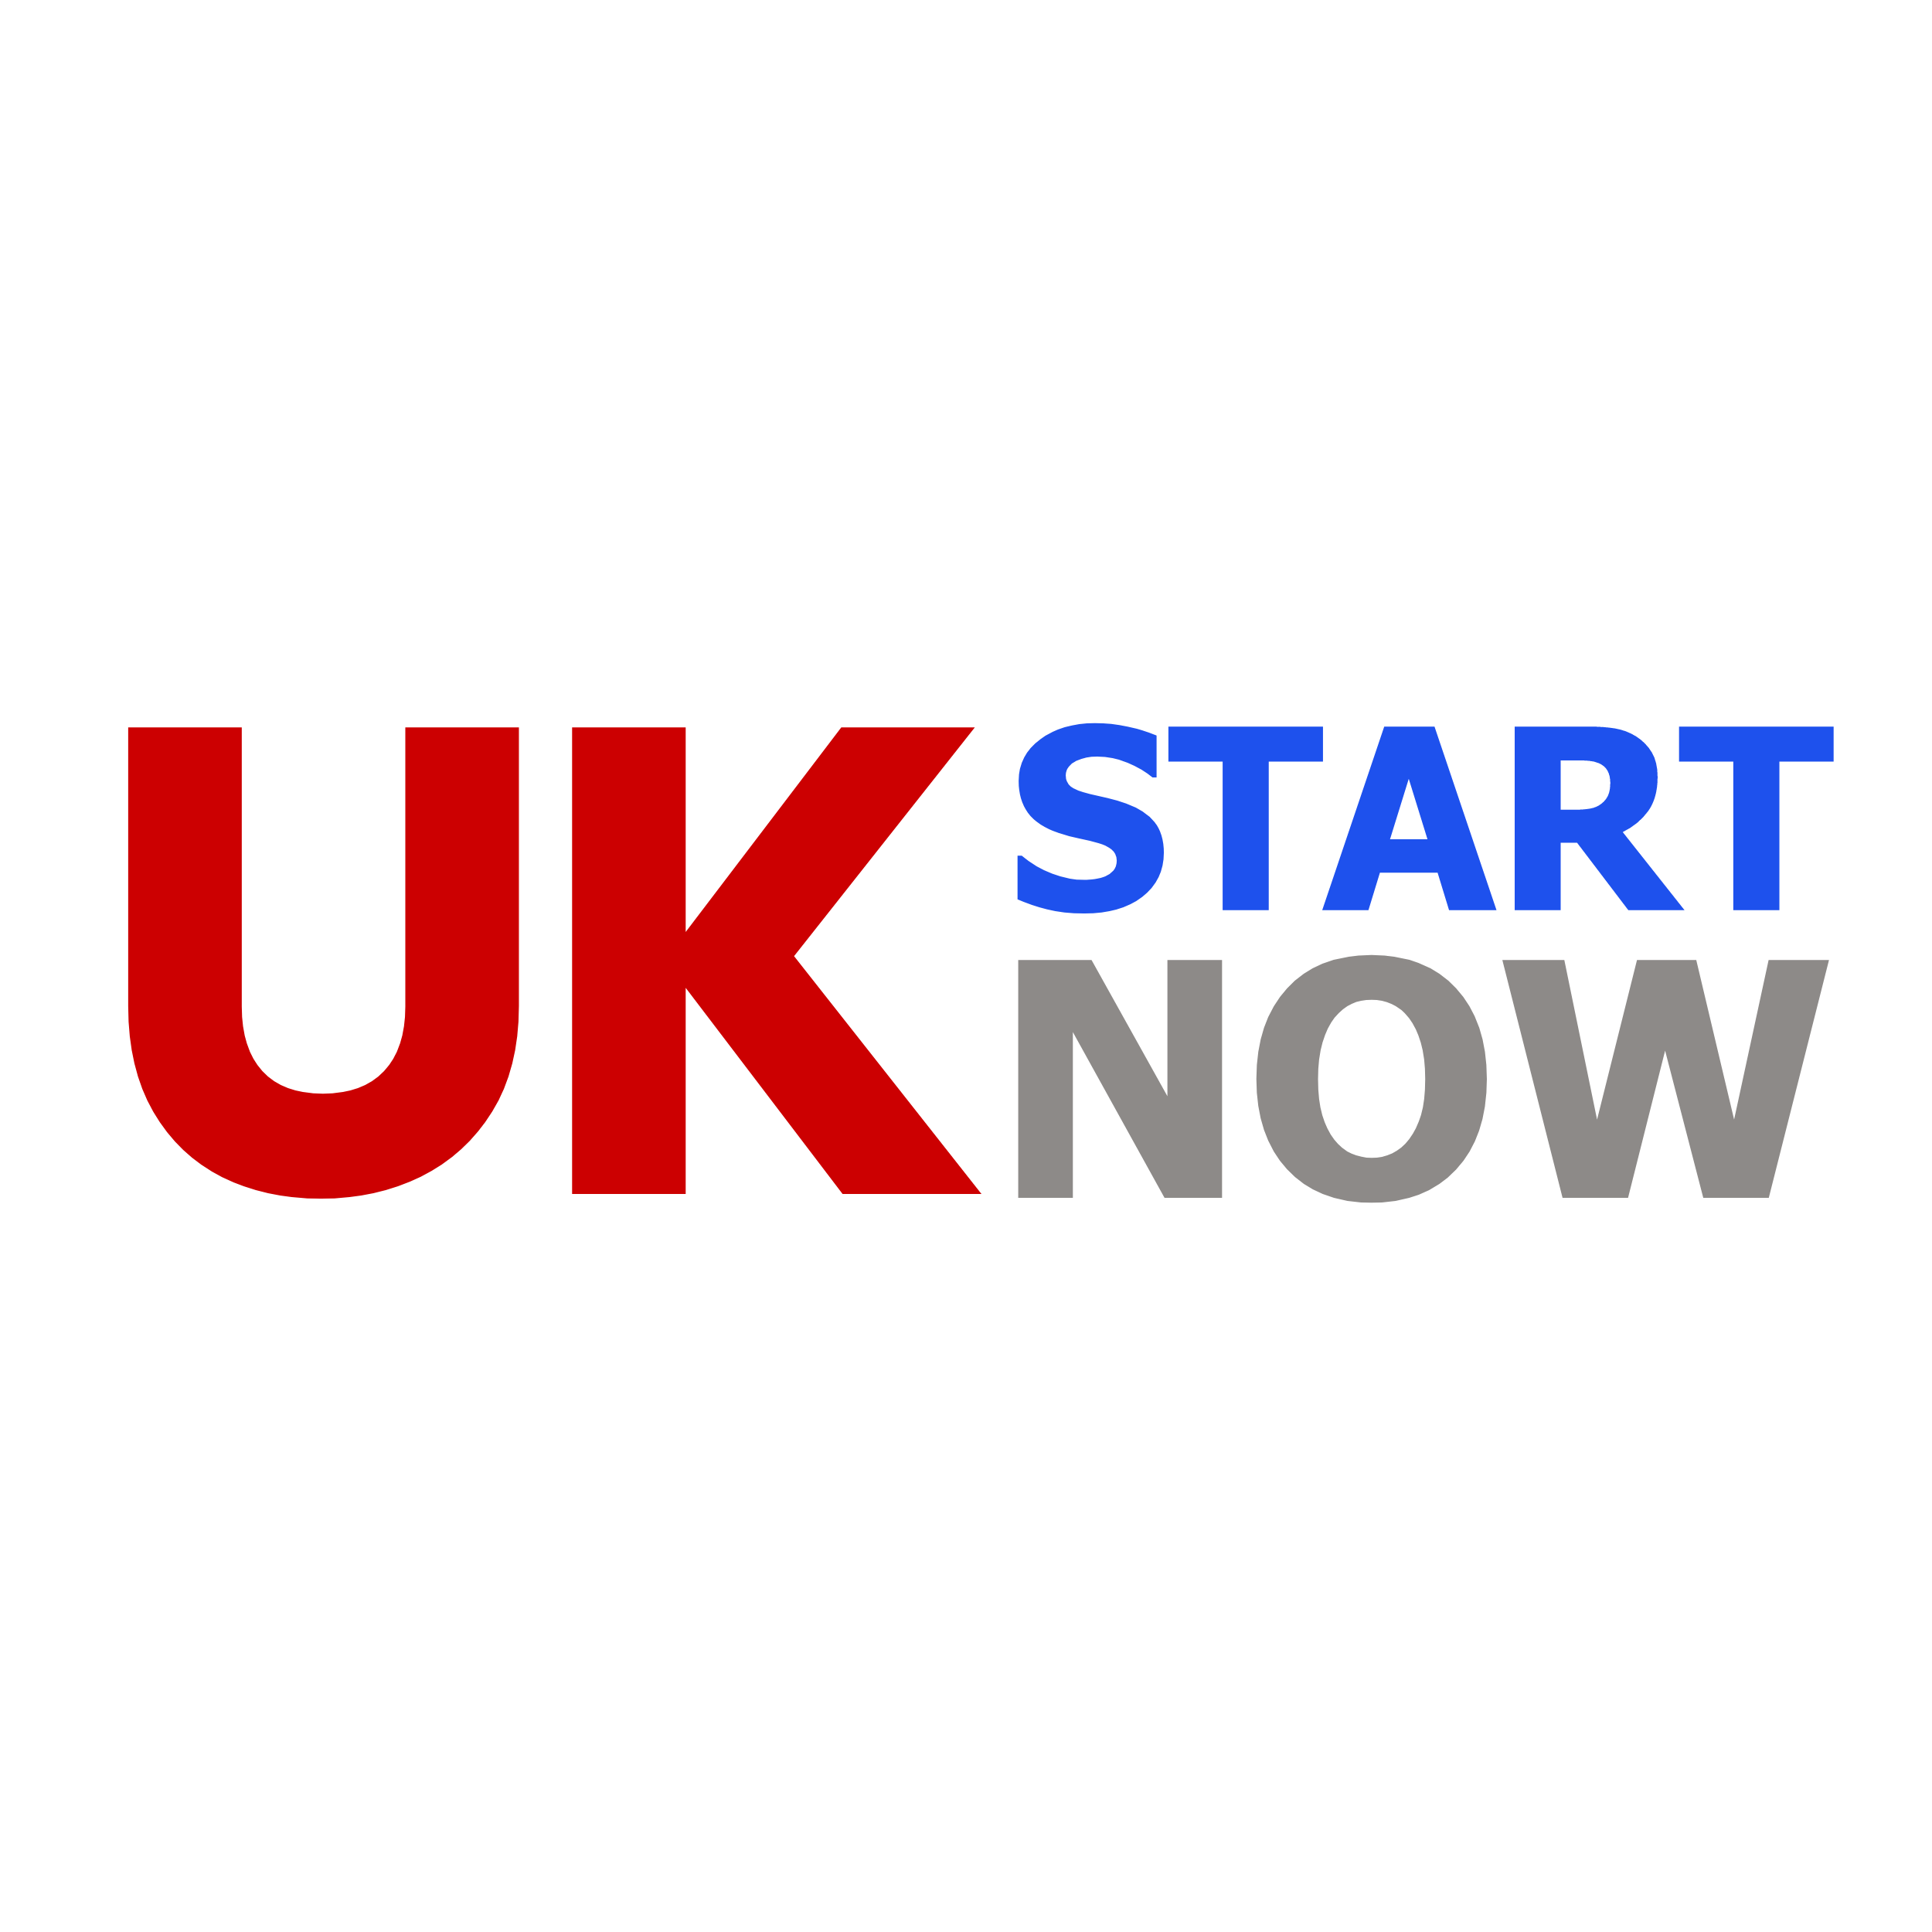 The landscape version of the official UK Start Now logo.